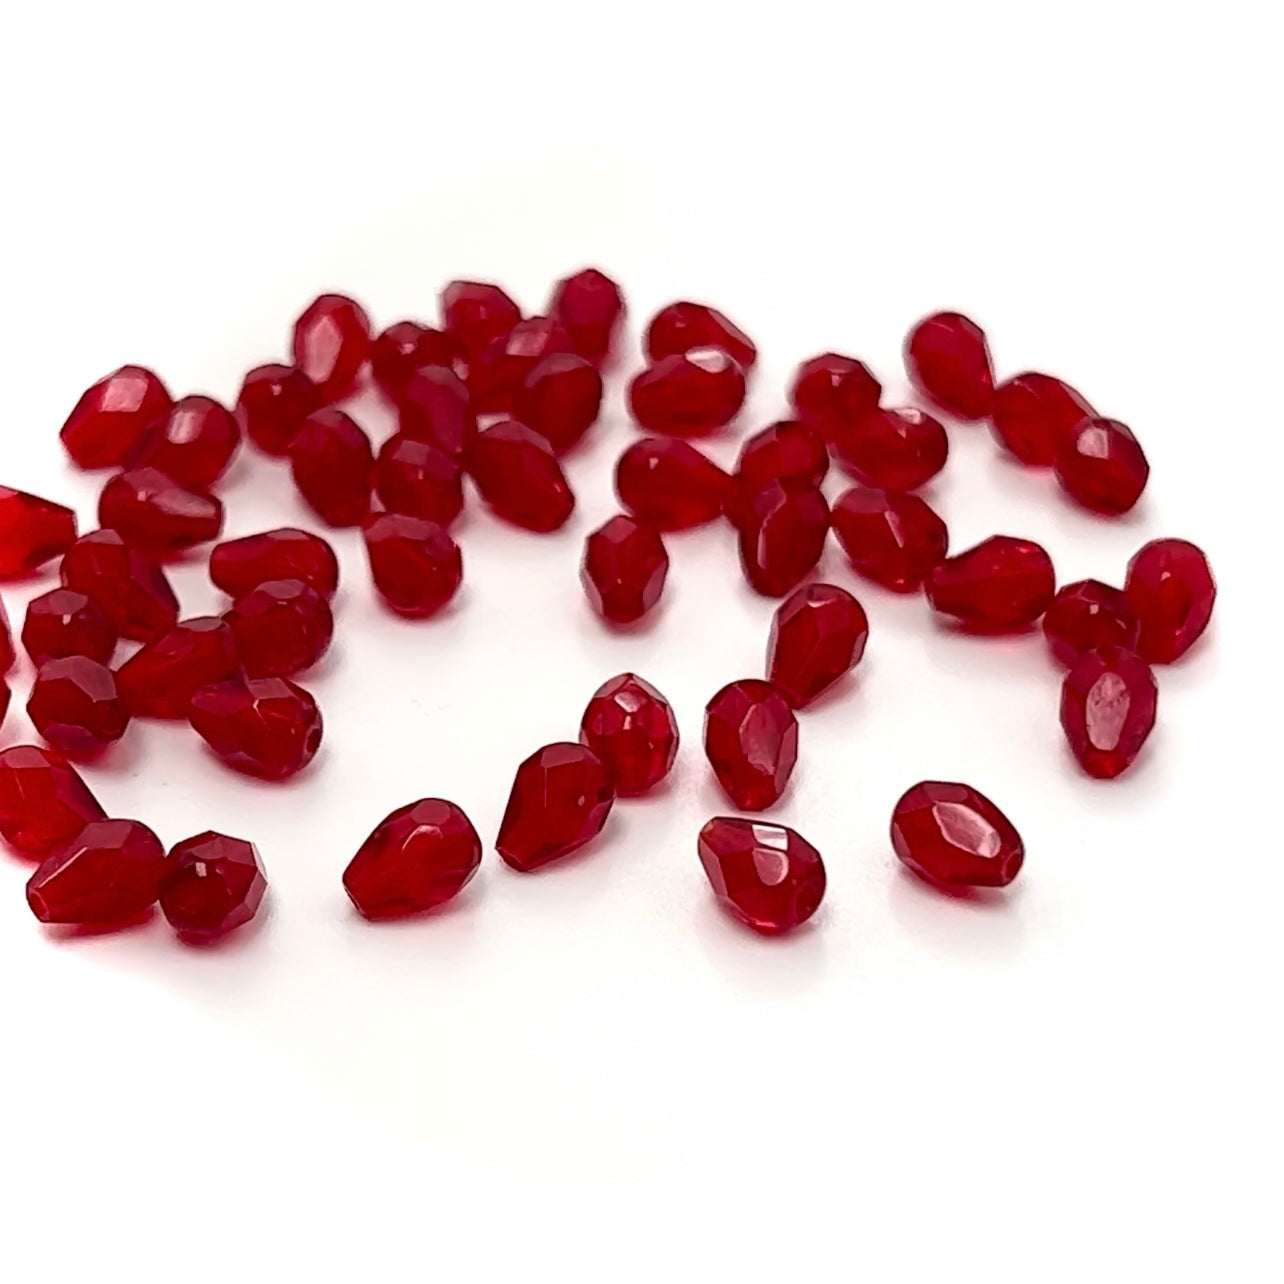 Czech Glass Pear Shaped Fire Polished Beads 7x5mm Medium Siam red Tear Drops, 50 pieces, J032